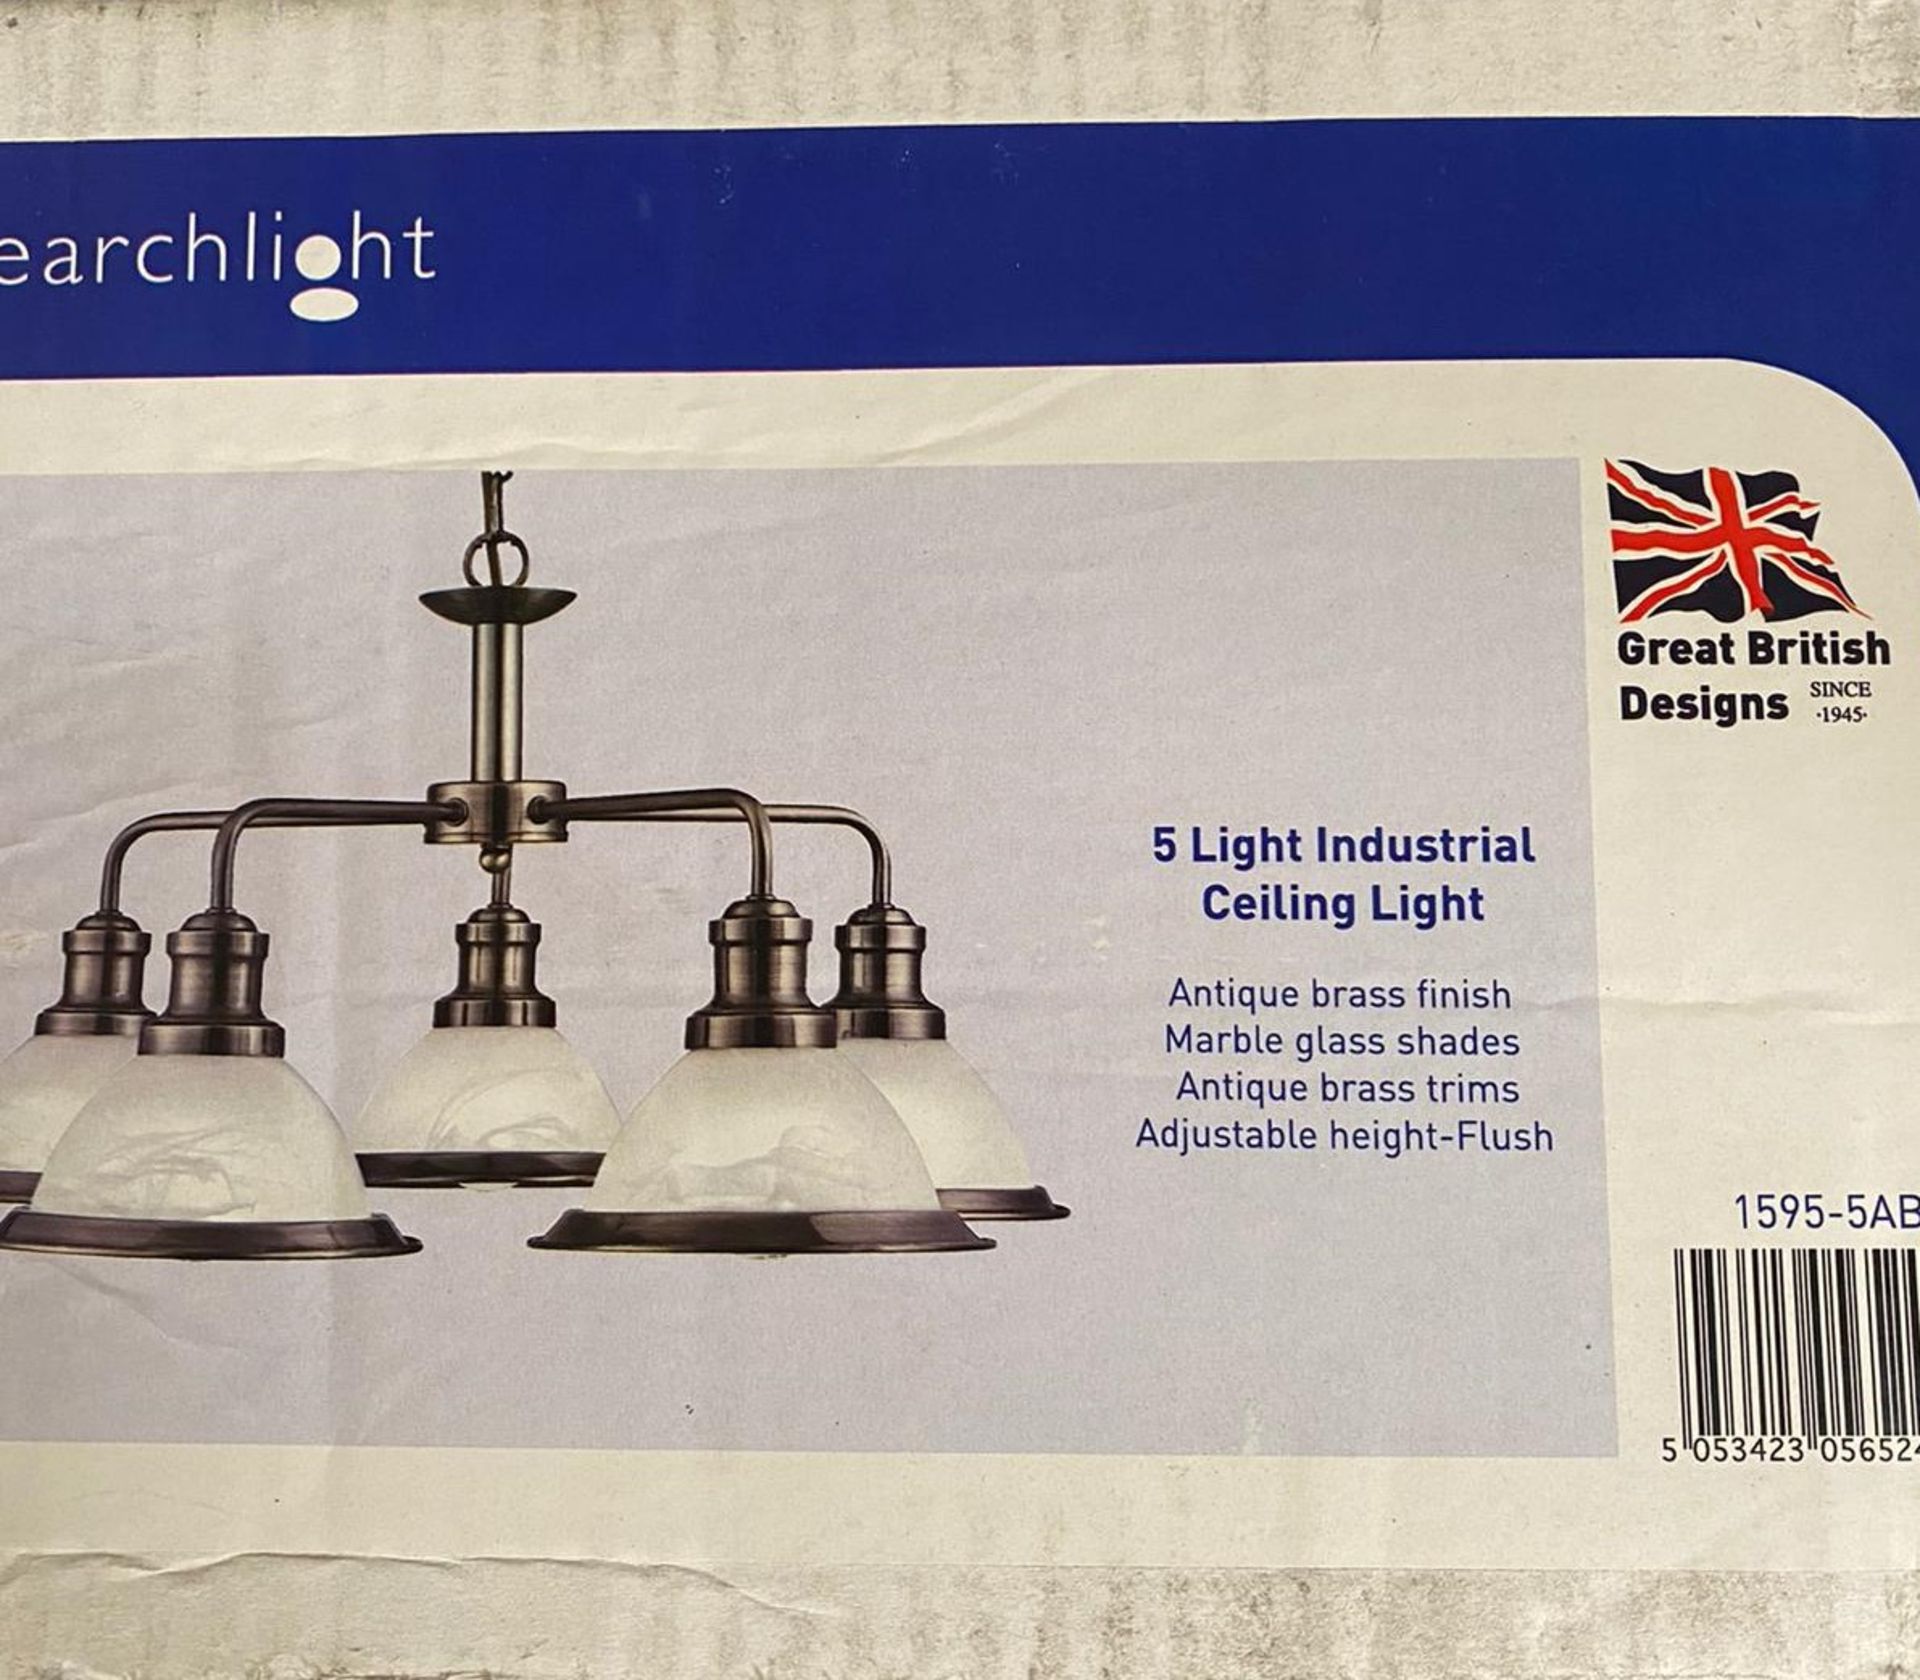 1 x Searchlight Industrial Ceiling Light in Antique Brass - Ref: 1595-5AB -New and Boxed - RRP: £150